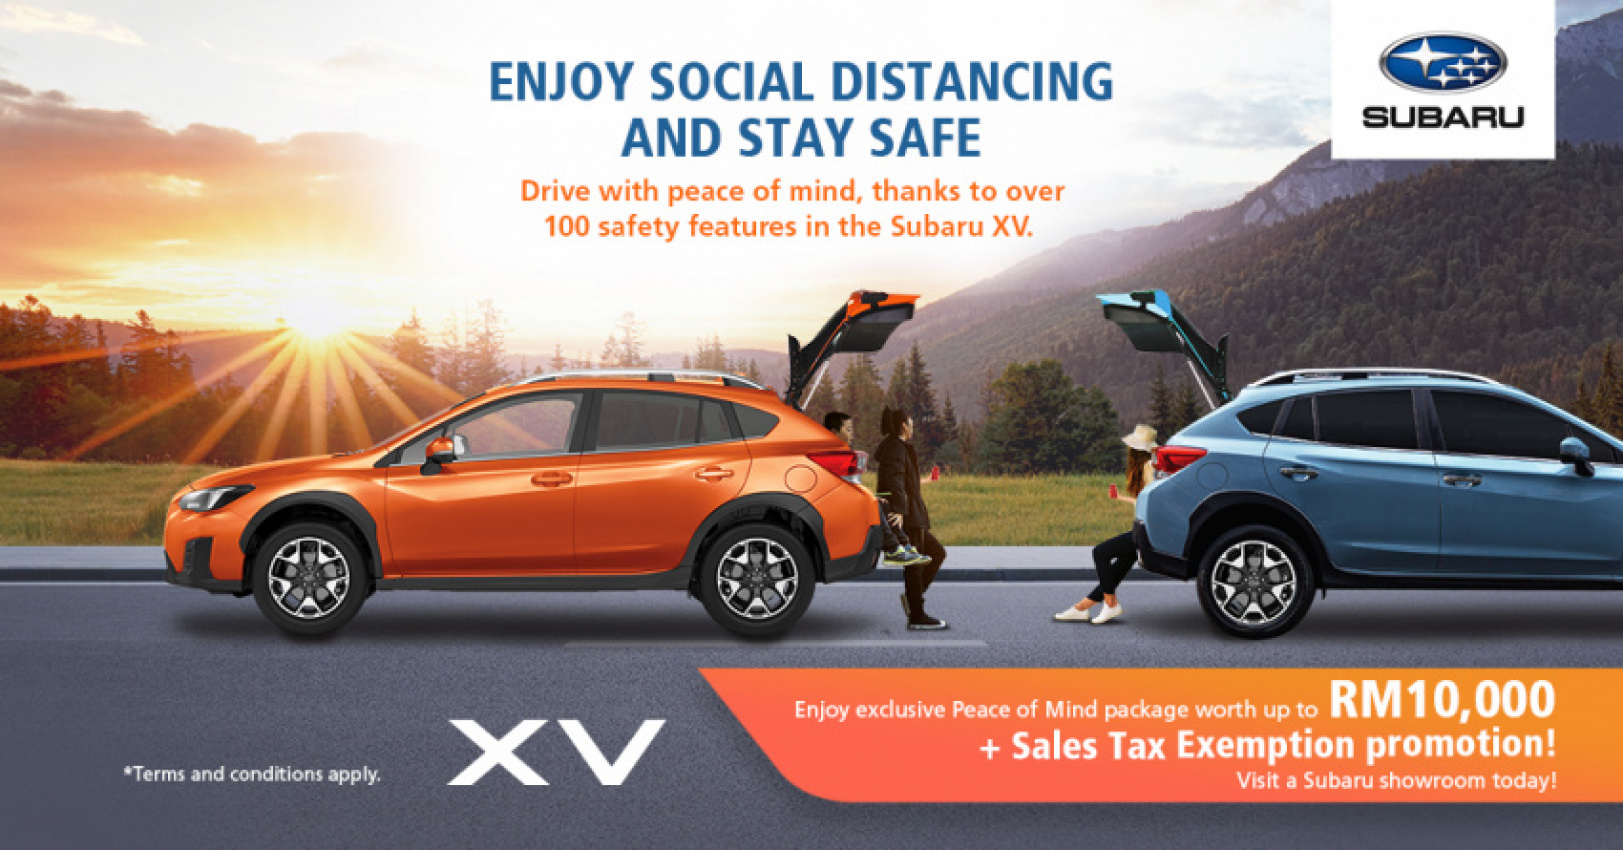 autos, car brands, cars, subaru, aftersales, automotive, cars, crossover, malaysia, promotions, service centre, showroom, subaru malaysia, tc subaru, subaru offers peace of mind for forester and xv